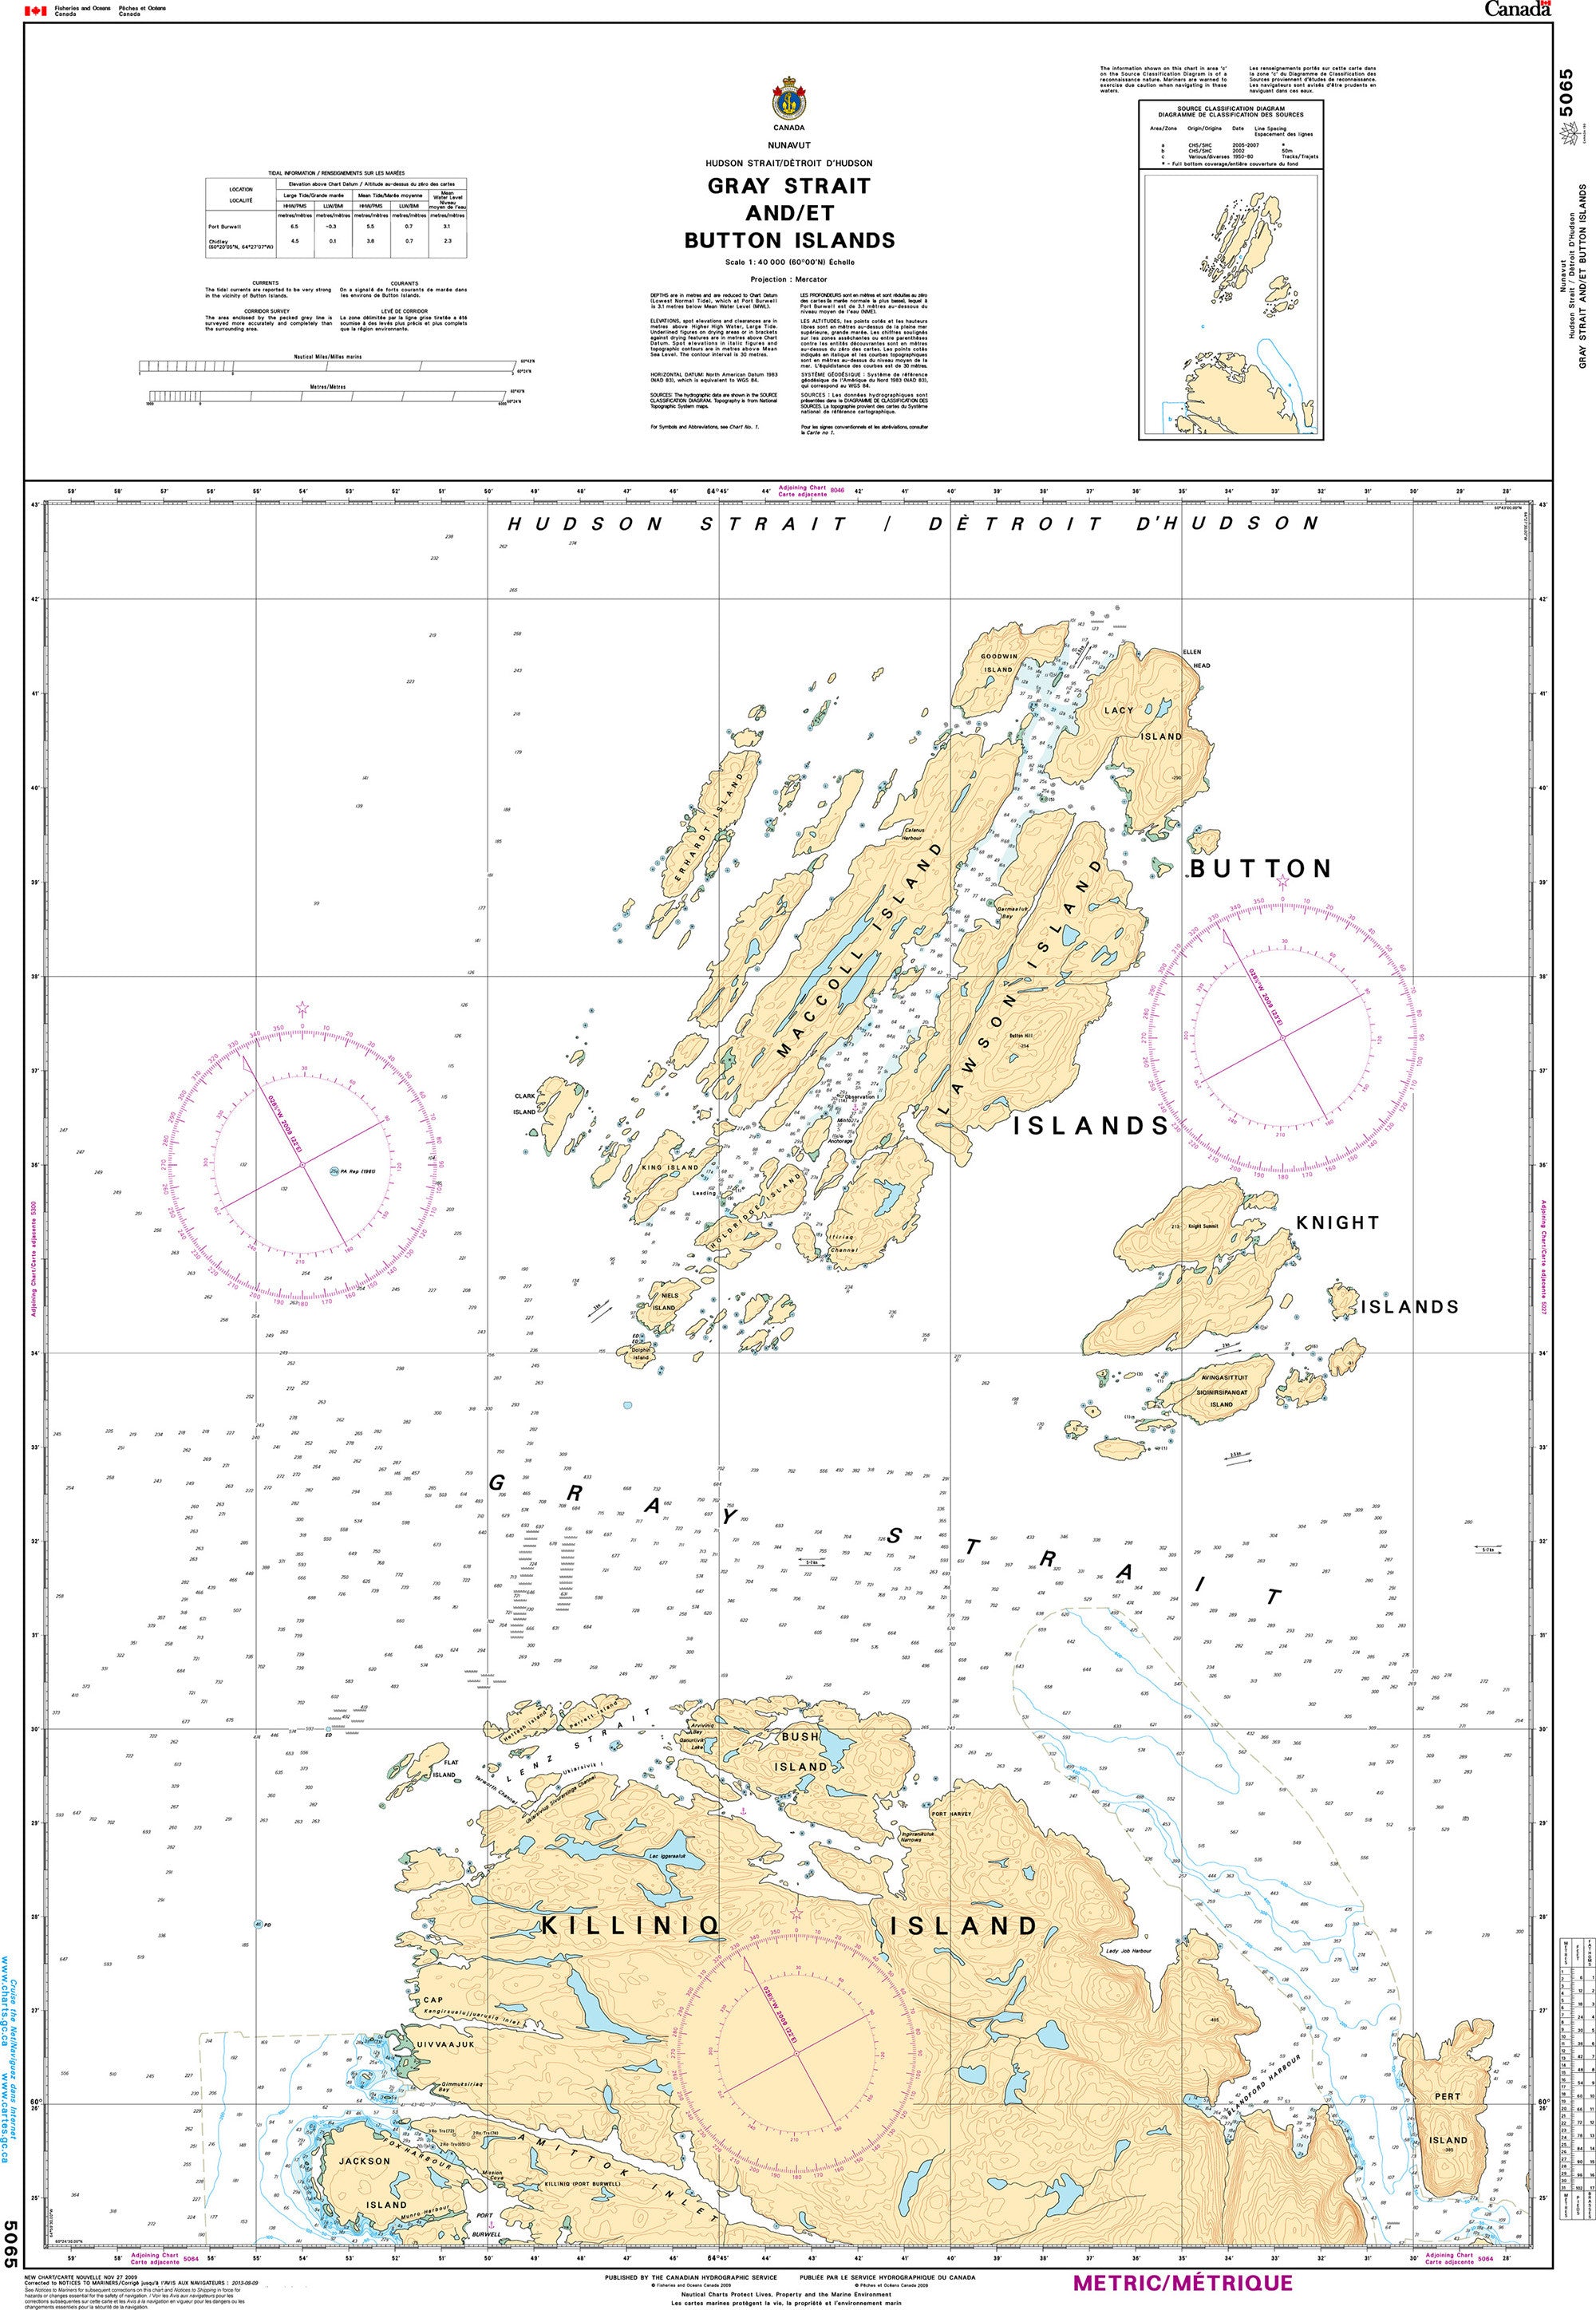 Canadian Hydrographic Service Nautical Chart CHS5065: Gray Strait and/et Button Islands